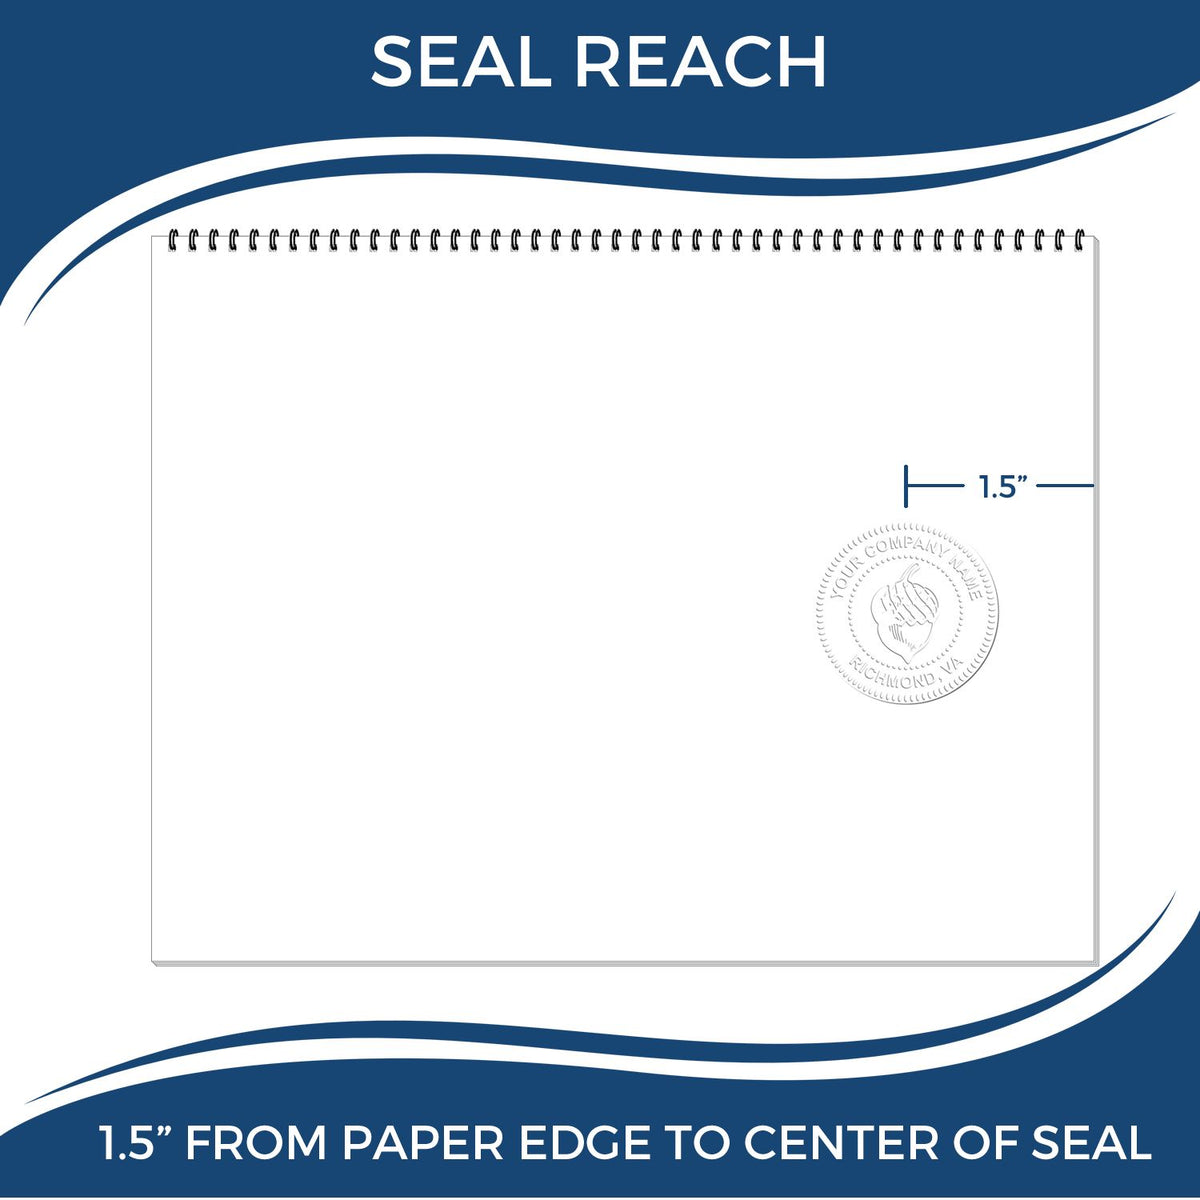 An infographic showing the seal reach which is represented by a ruler and a miniature seal image of the State of Vermont Soft Land Surveyor Embossing Seal